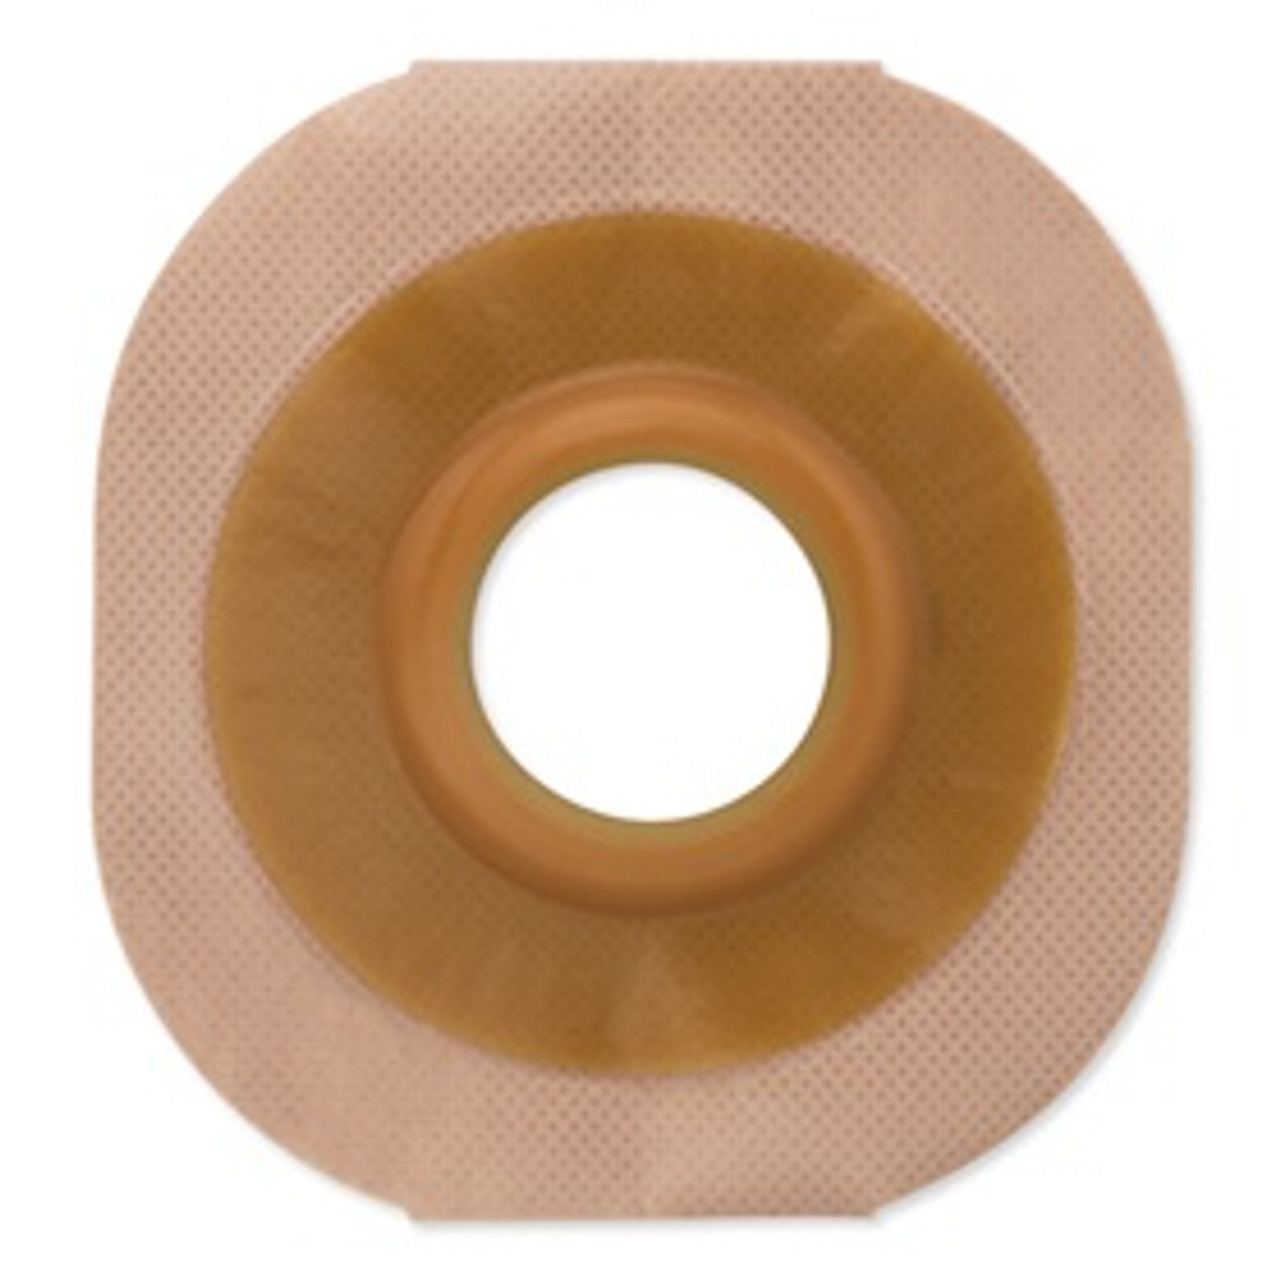 Hollister 13905 BX/5 NEW IMAGE FLEXTEND CONVEX SKIN Barrier WITH TAPERED BORDER, 2 1/4" (57MM) FLANGE, PRE-CUT 1 1/8" (29MM)